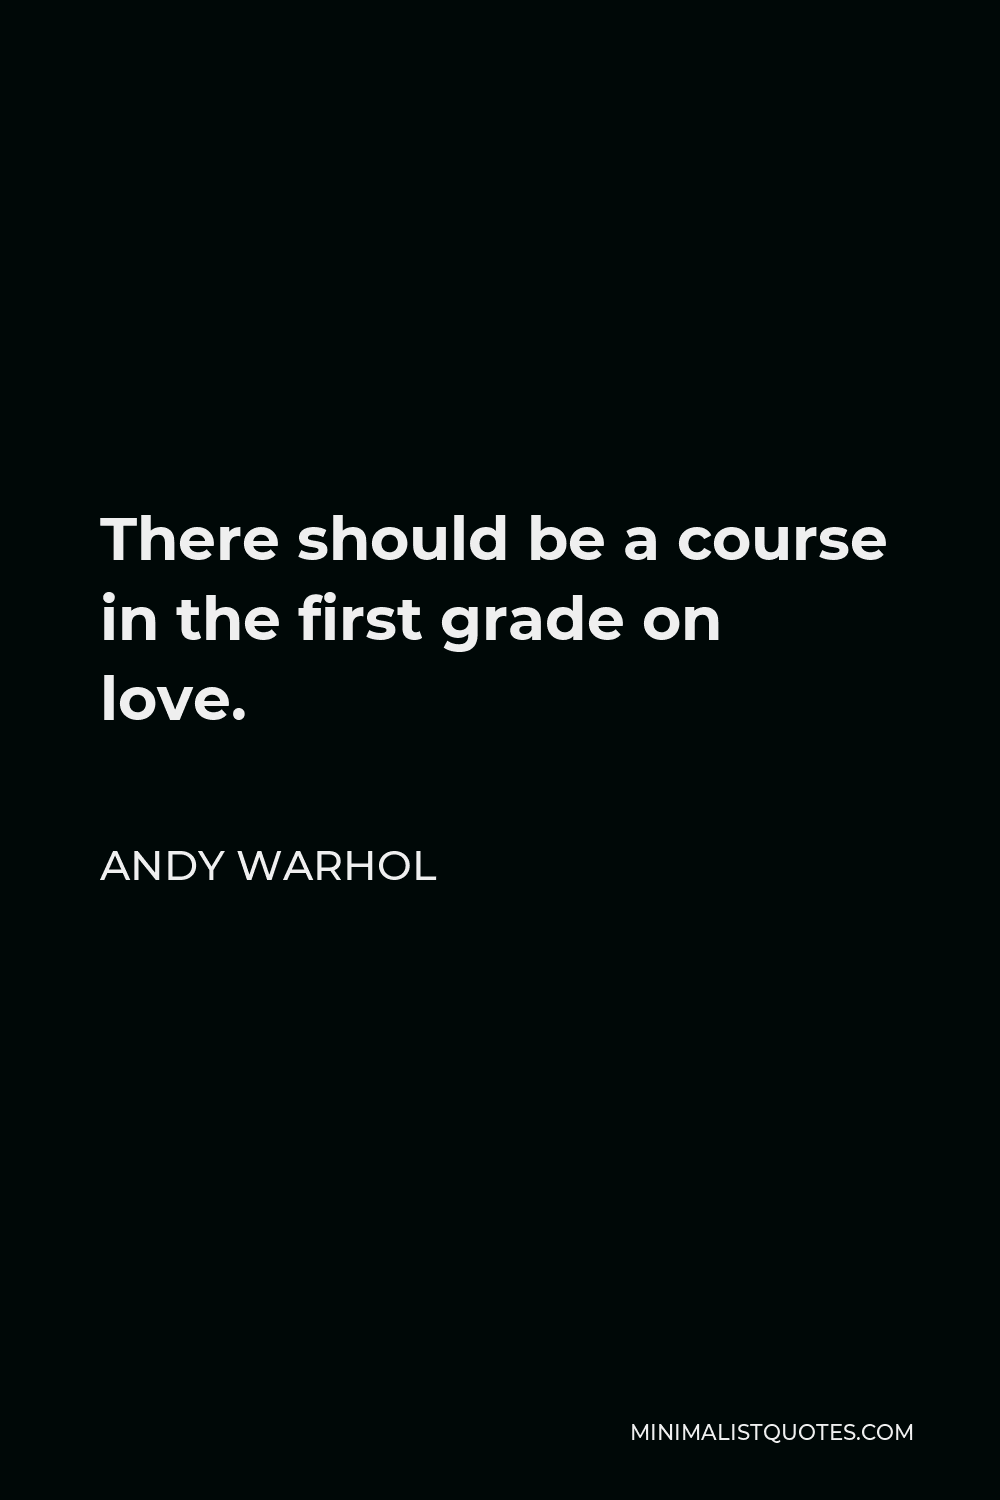 Andy Warhol Quote - There should be a course in the first grade on love.